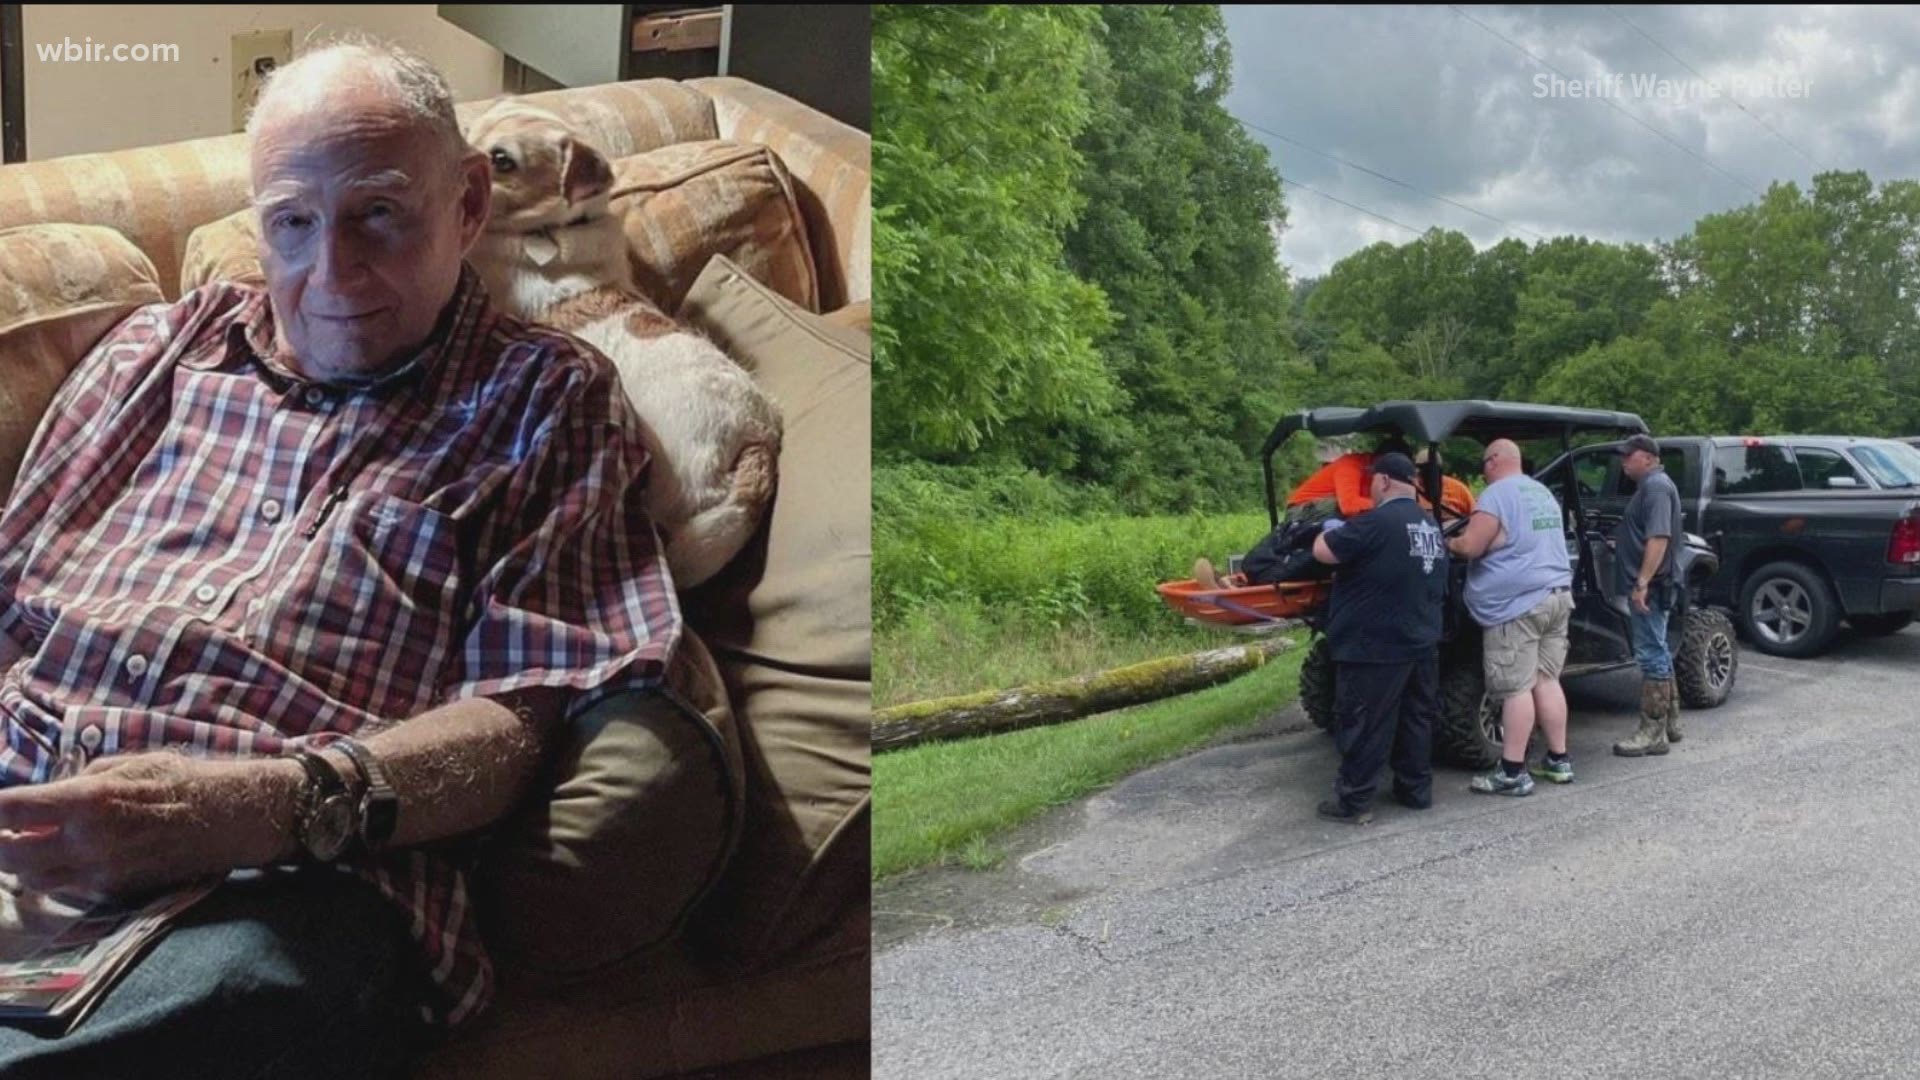 Sheriff Wayne Potter posted on Facebook earlier today that William Witten was being taken to the UT Medical Center.